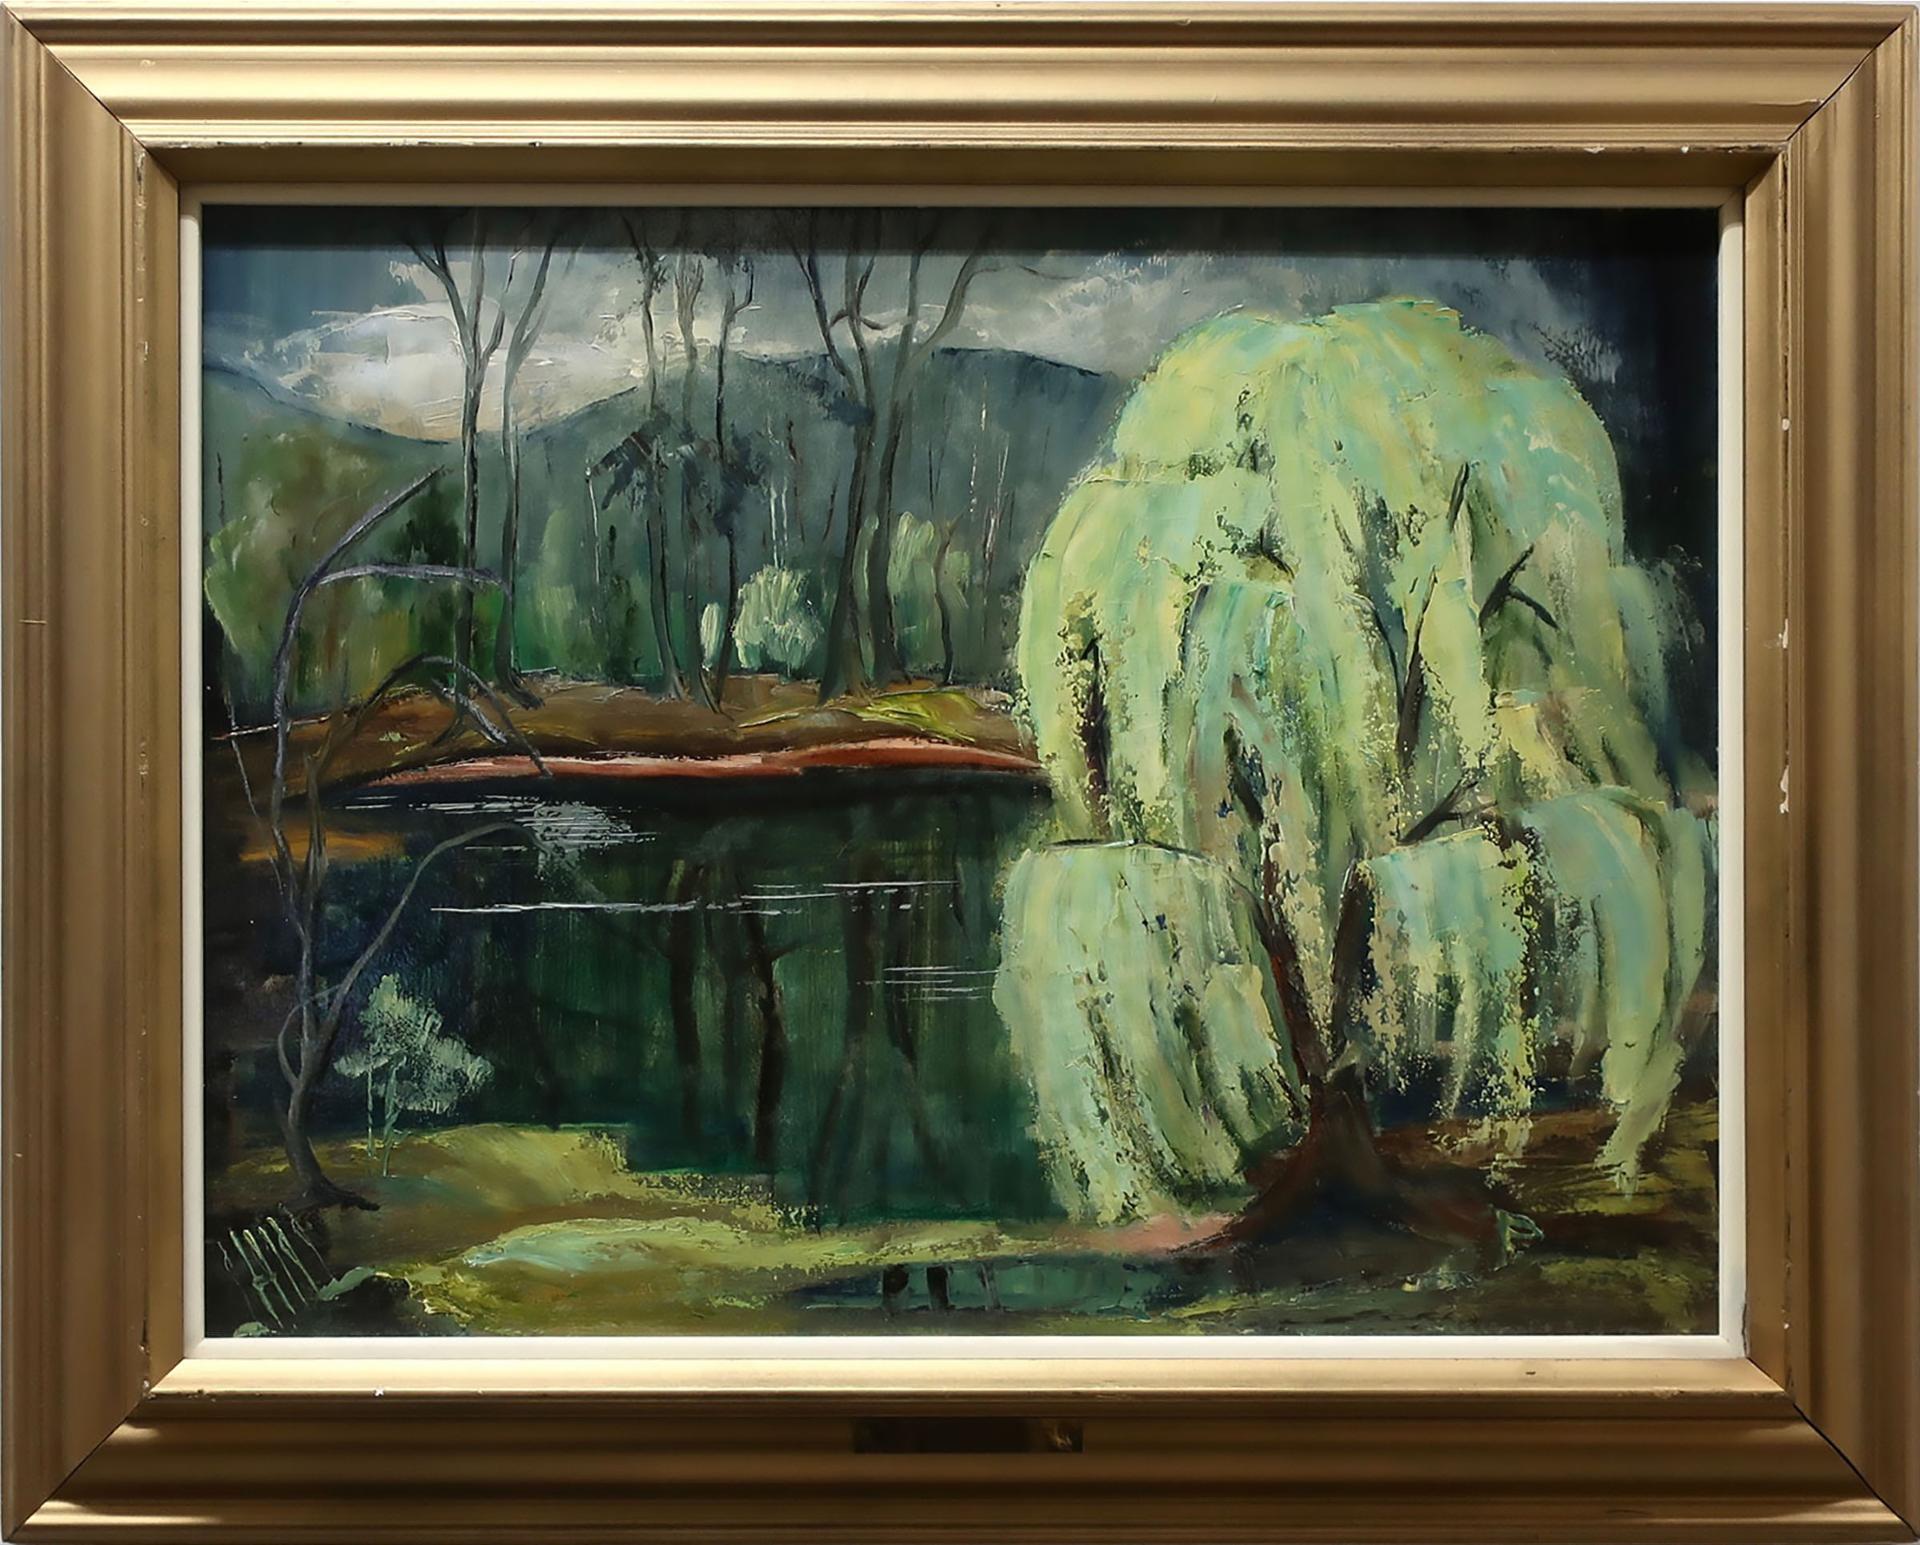 Jessie L. Hill - Reflections Of A Willow Tree In My Garden